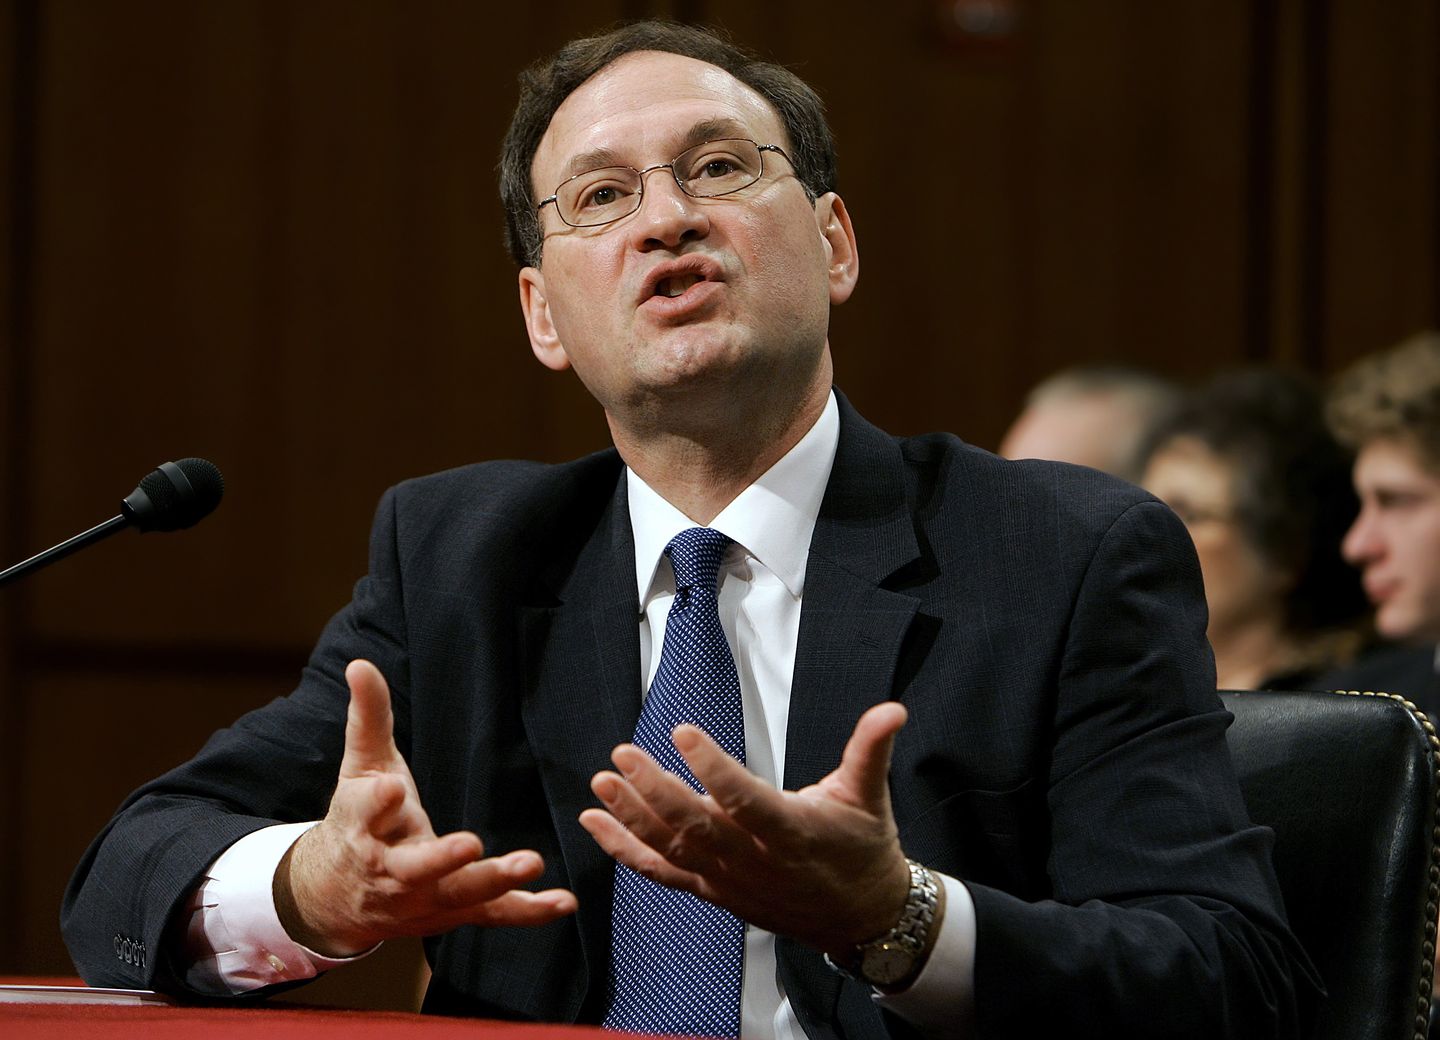 Justice Samuel Alito's home targeted by pro-choice protesters